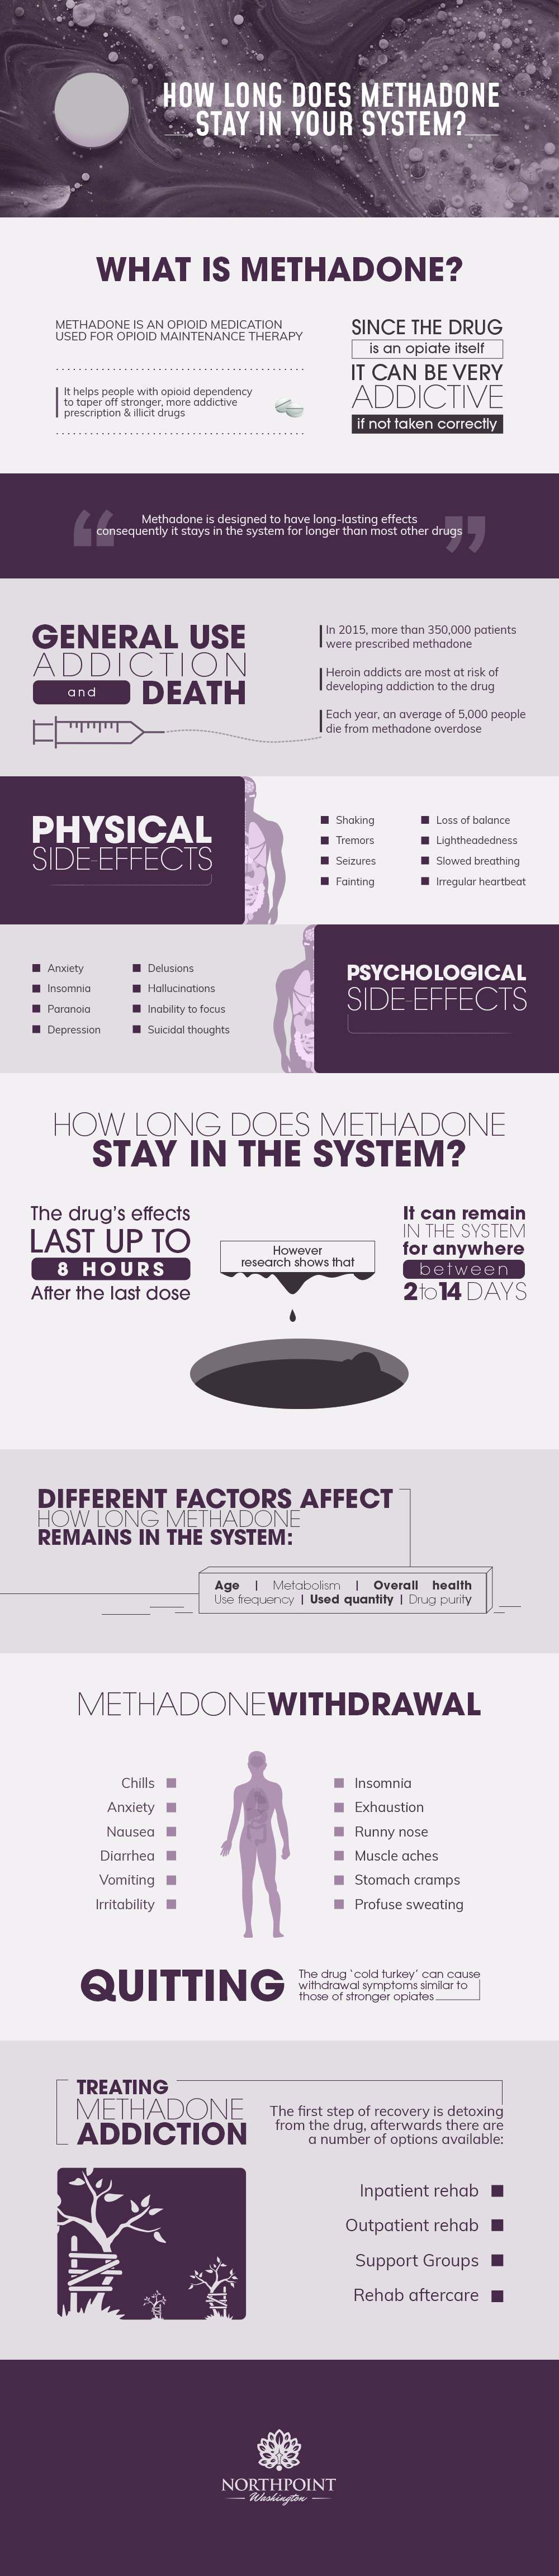 How long does a methadone pill stay in your system What You Should Know About Methadone In Your System